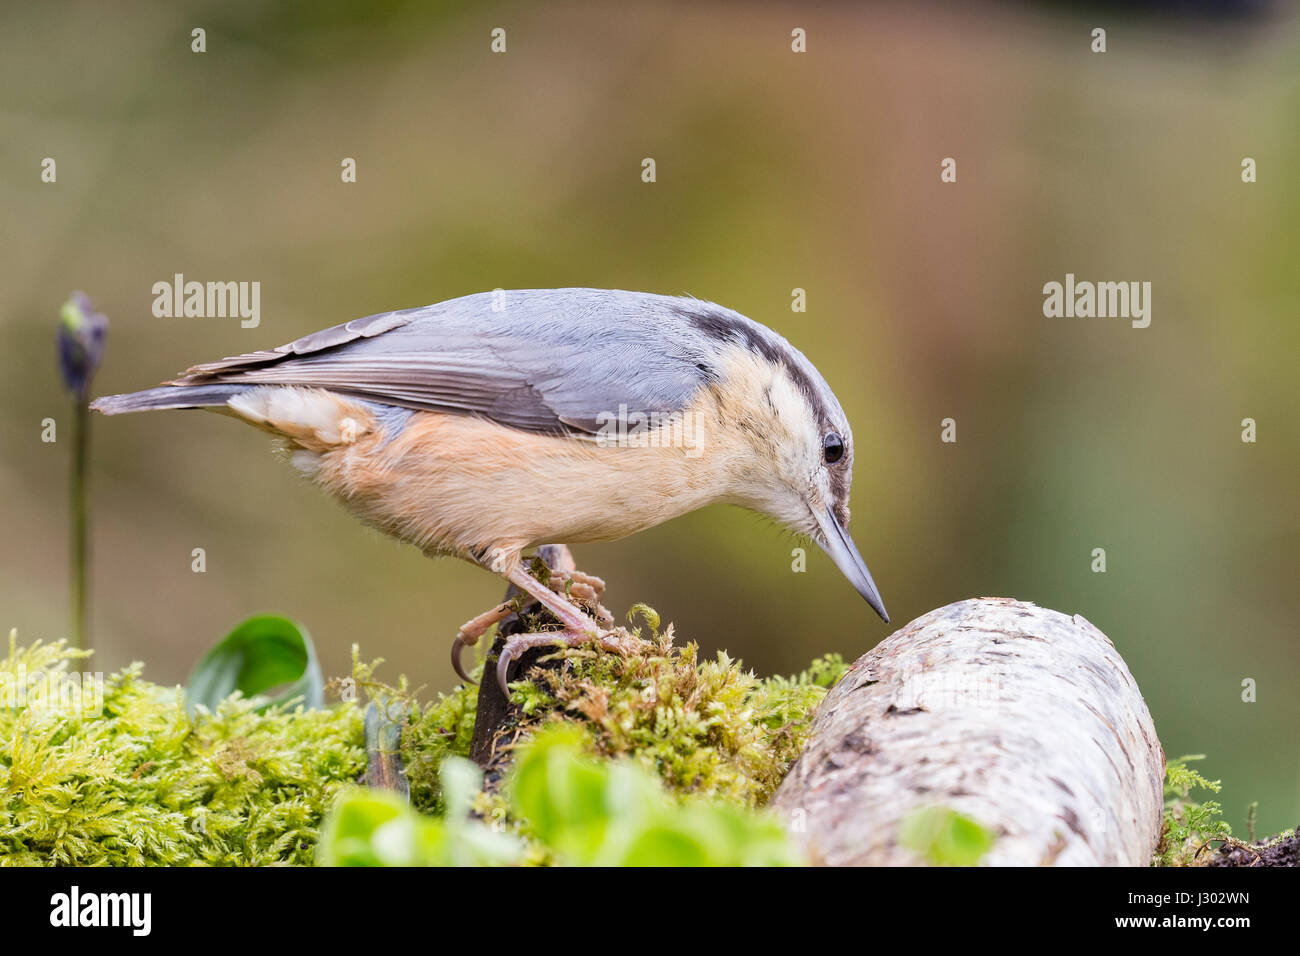 A nuthatch in full spring plumage in rural mid Wales. Stock Photo